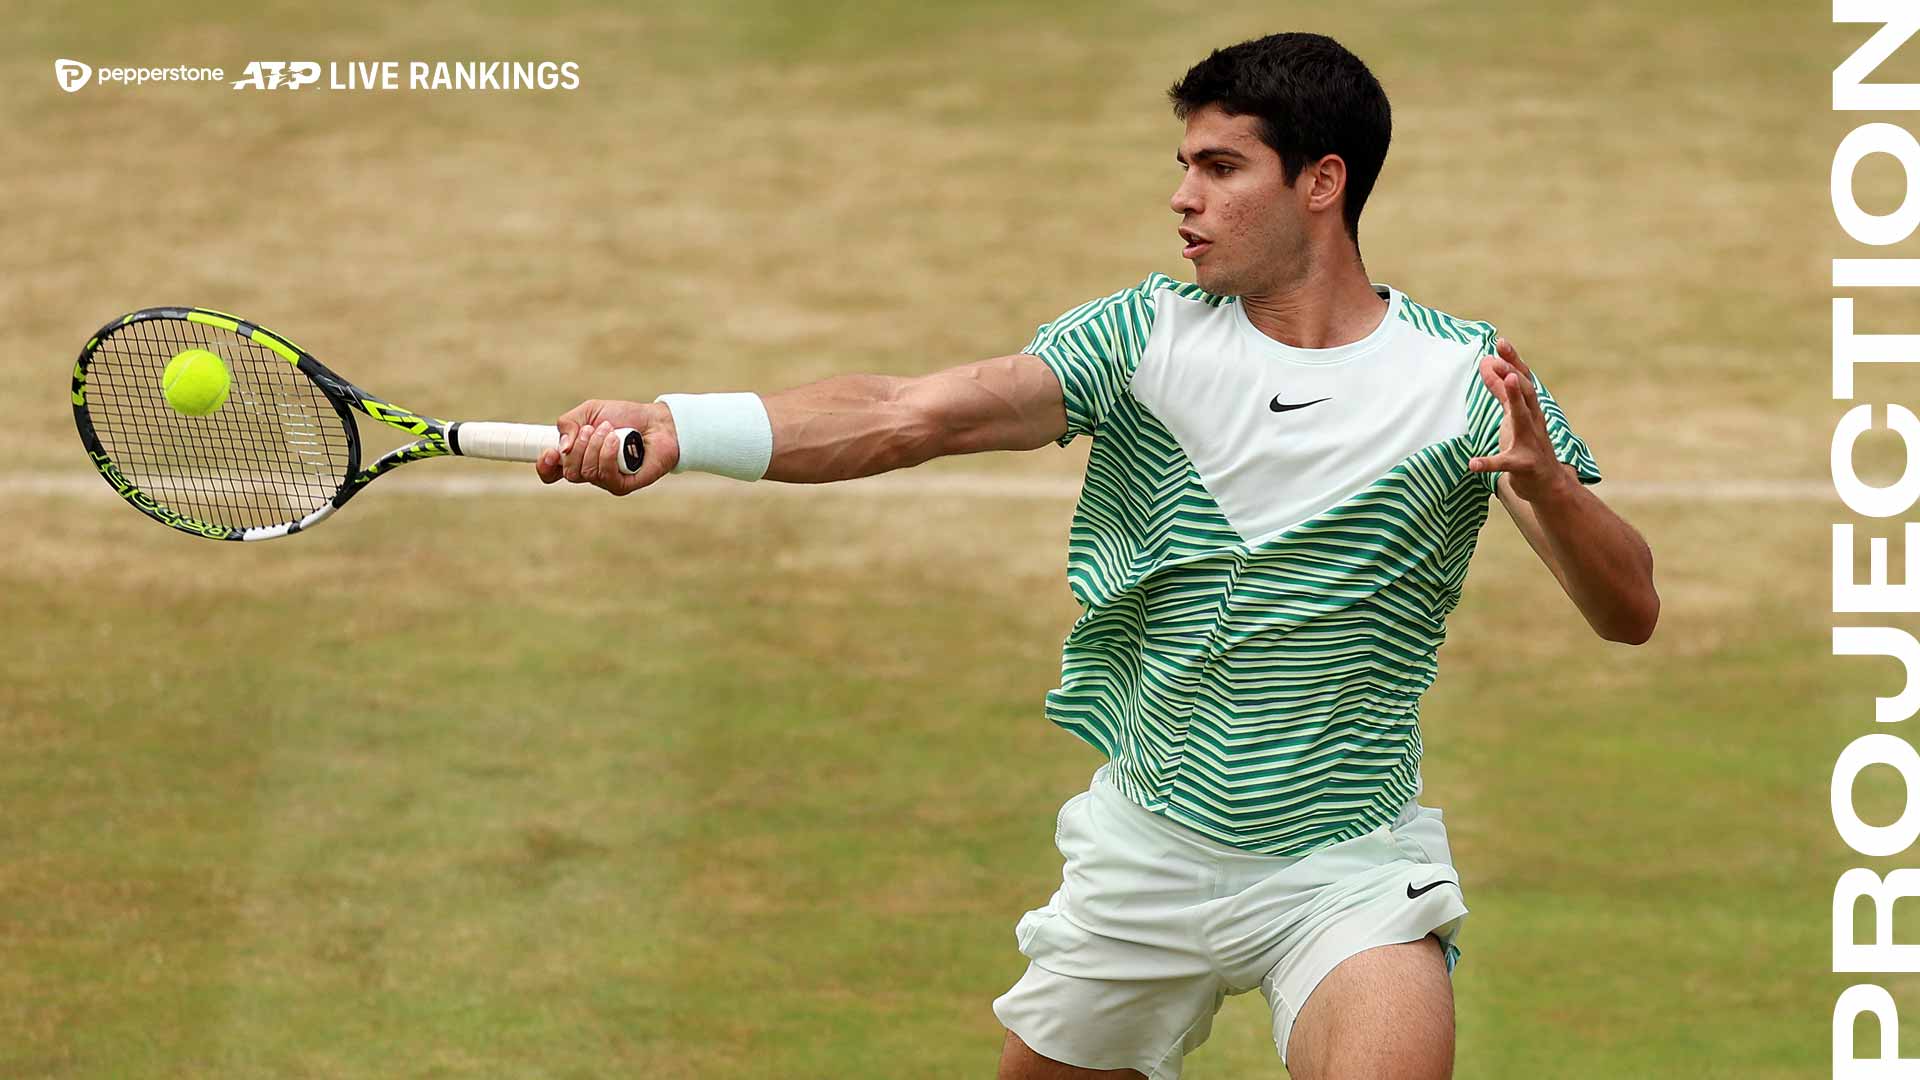 Carlos Alcaraz enters Wimbledon as the No. 1 player in the Pepperstone ATP Rankings.